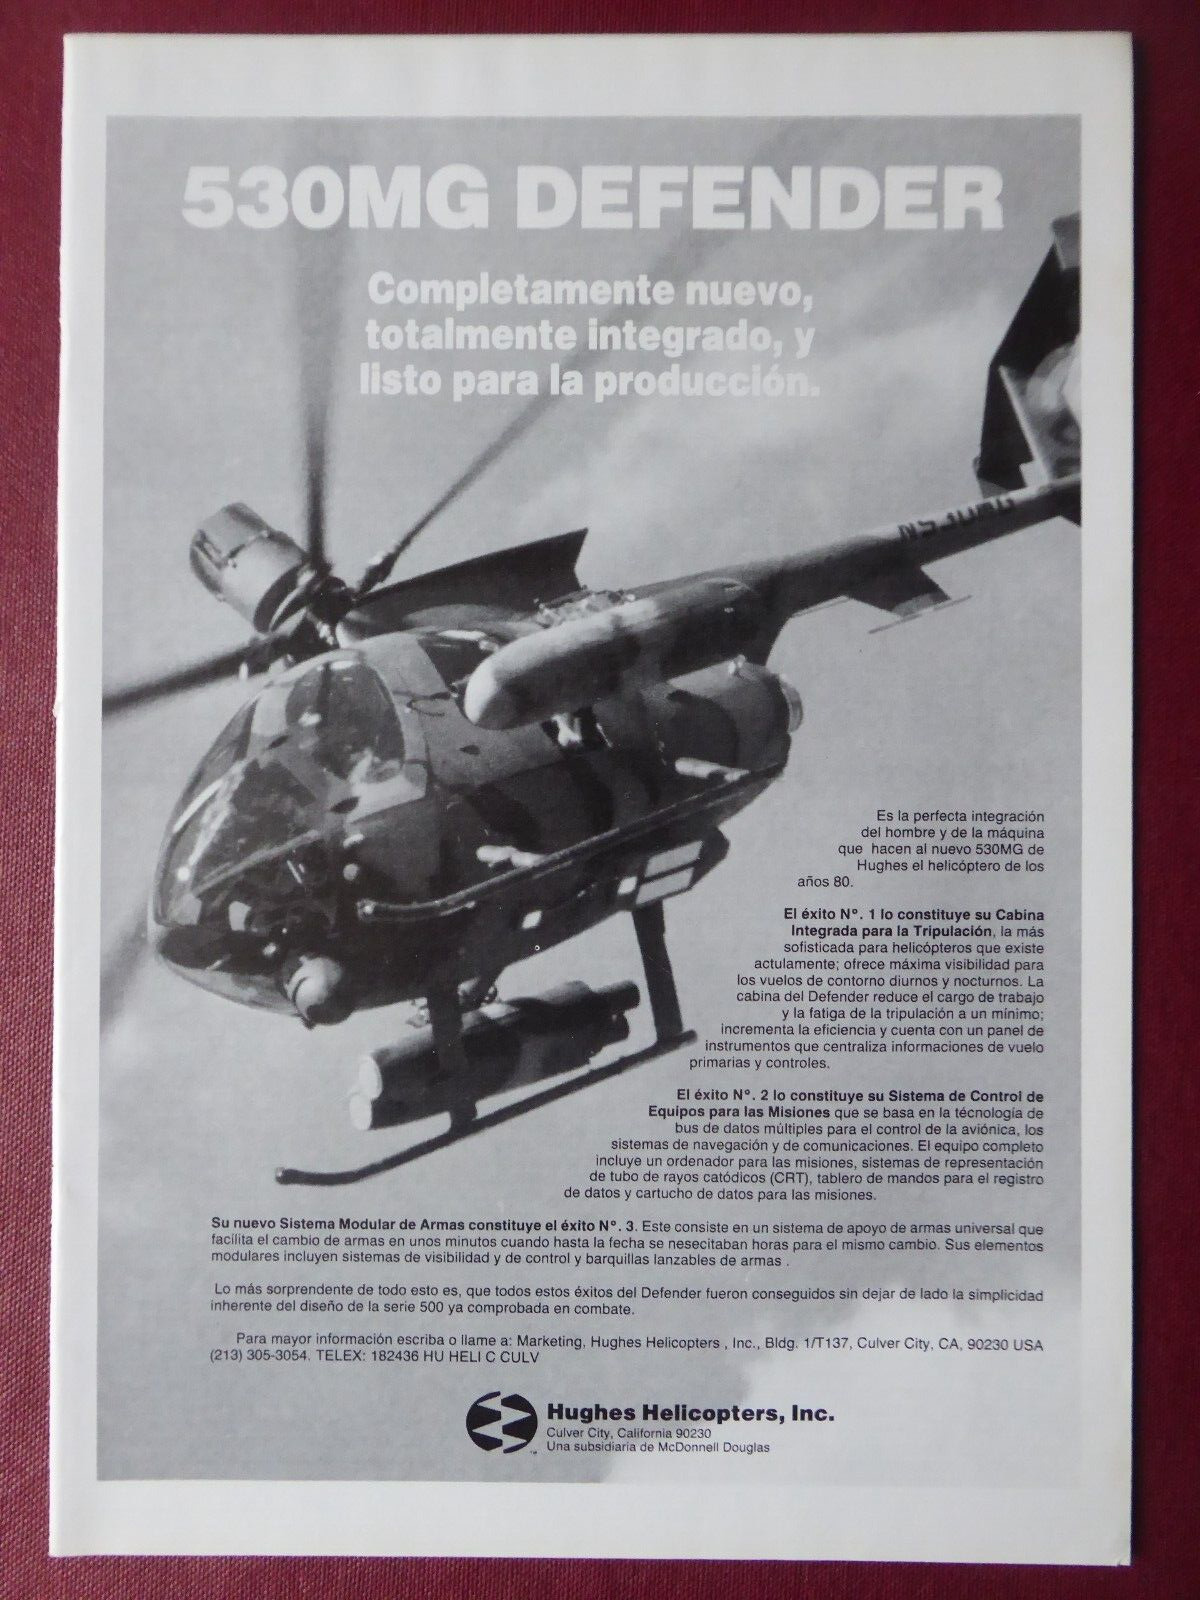 4/1985 PUB HUGHES 530MG DEFENDER MILITARY HELICOPTER SPANISH AD